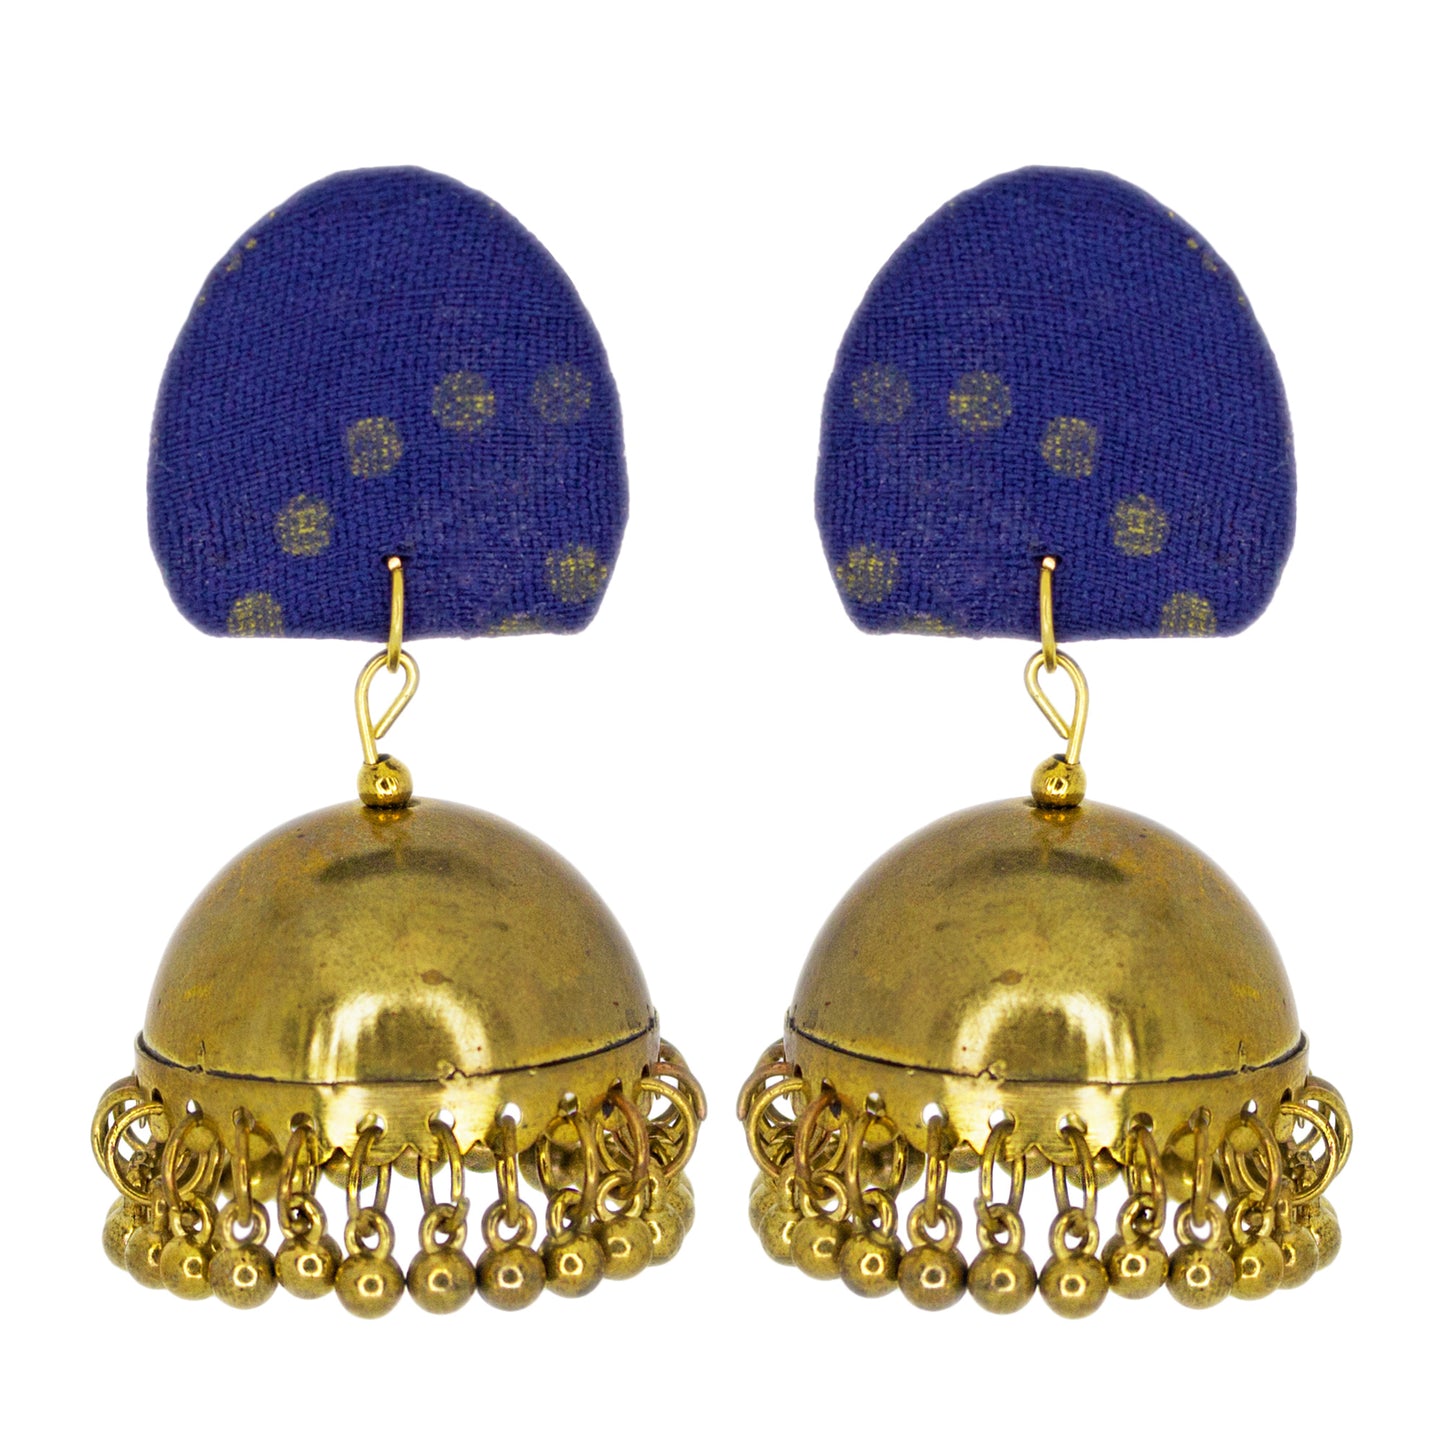 Organic Vibes Handmade Unique Geometric Blue Stud With Golden Jhumka Fabric Earrings For Women